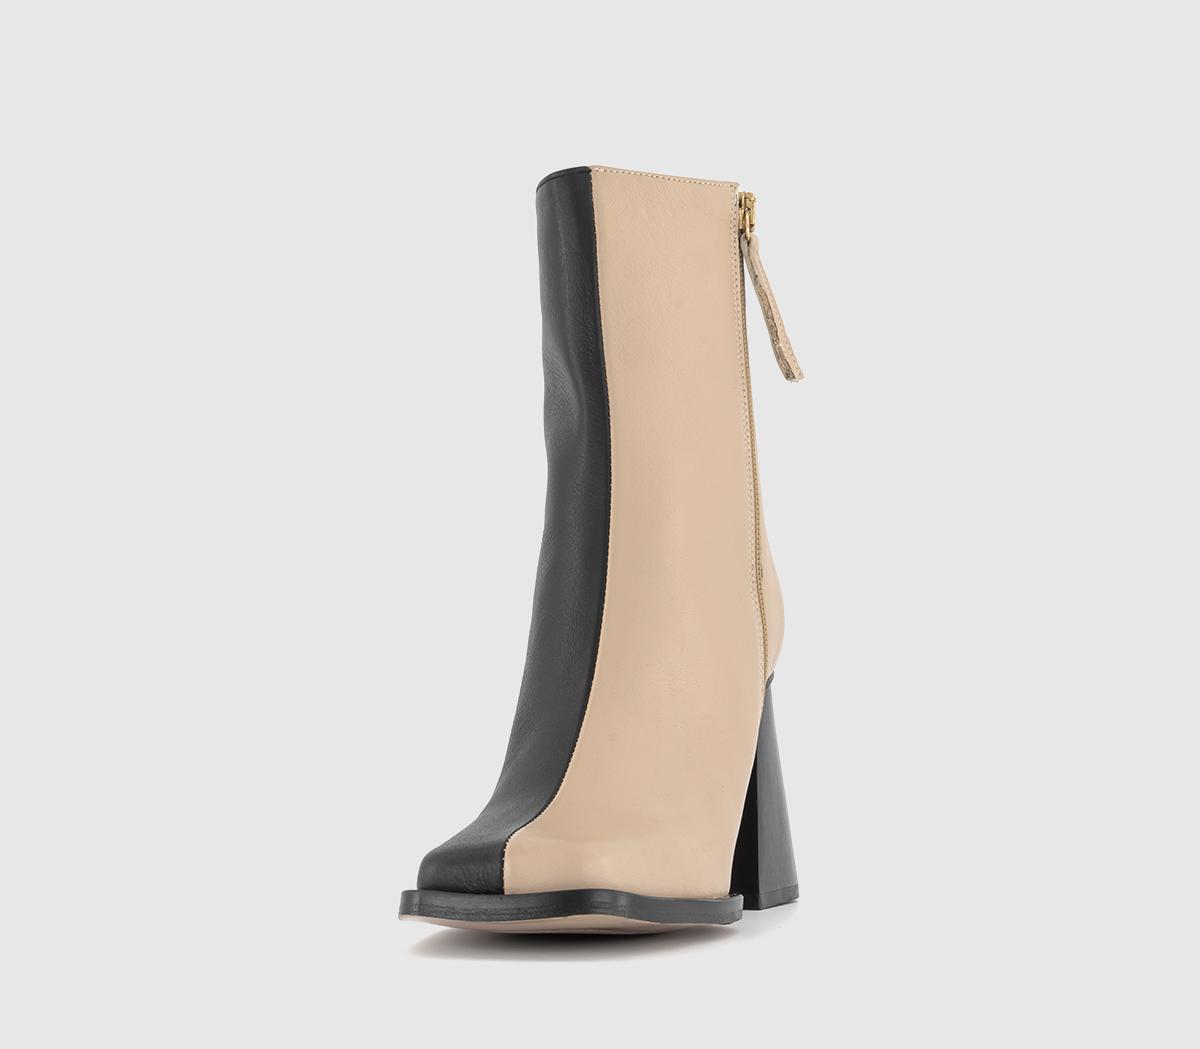 South Bicolor Heeled Ankle Boots Black Cream